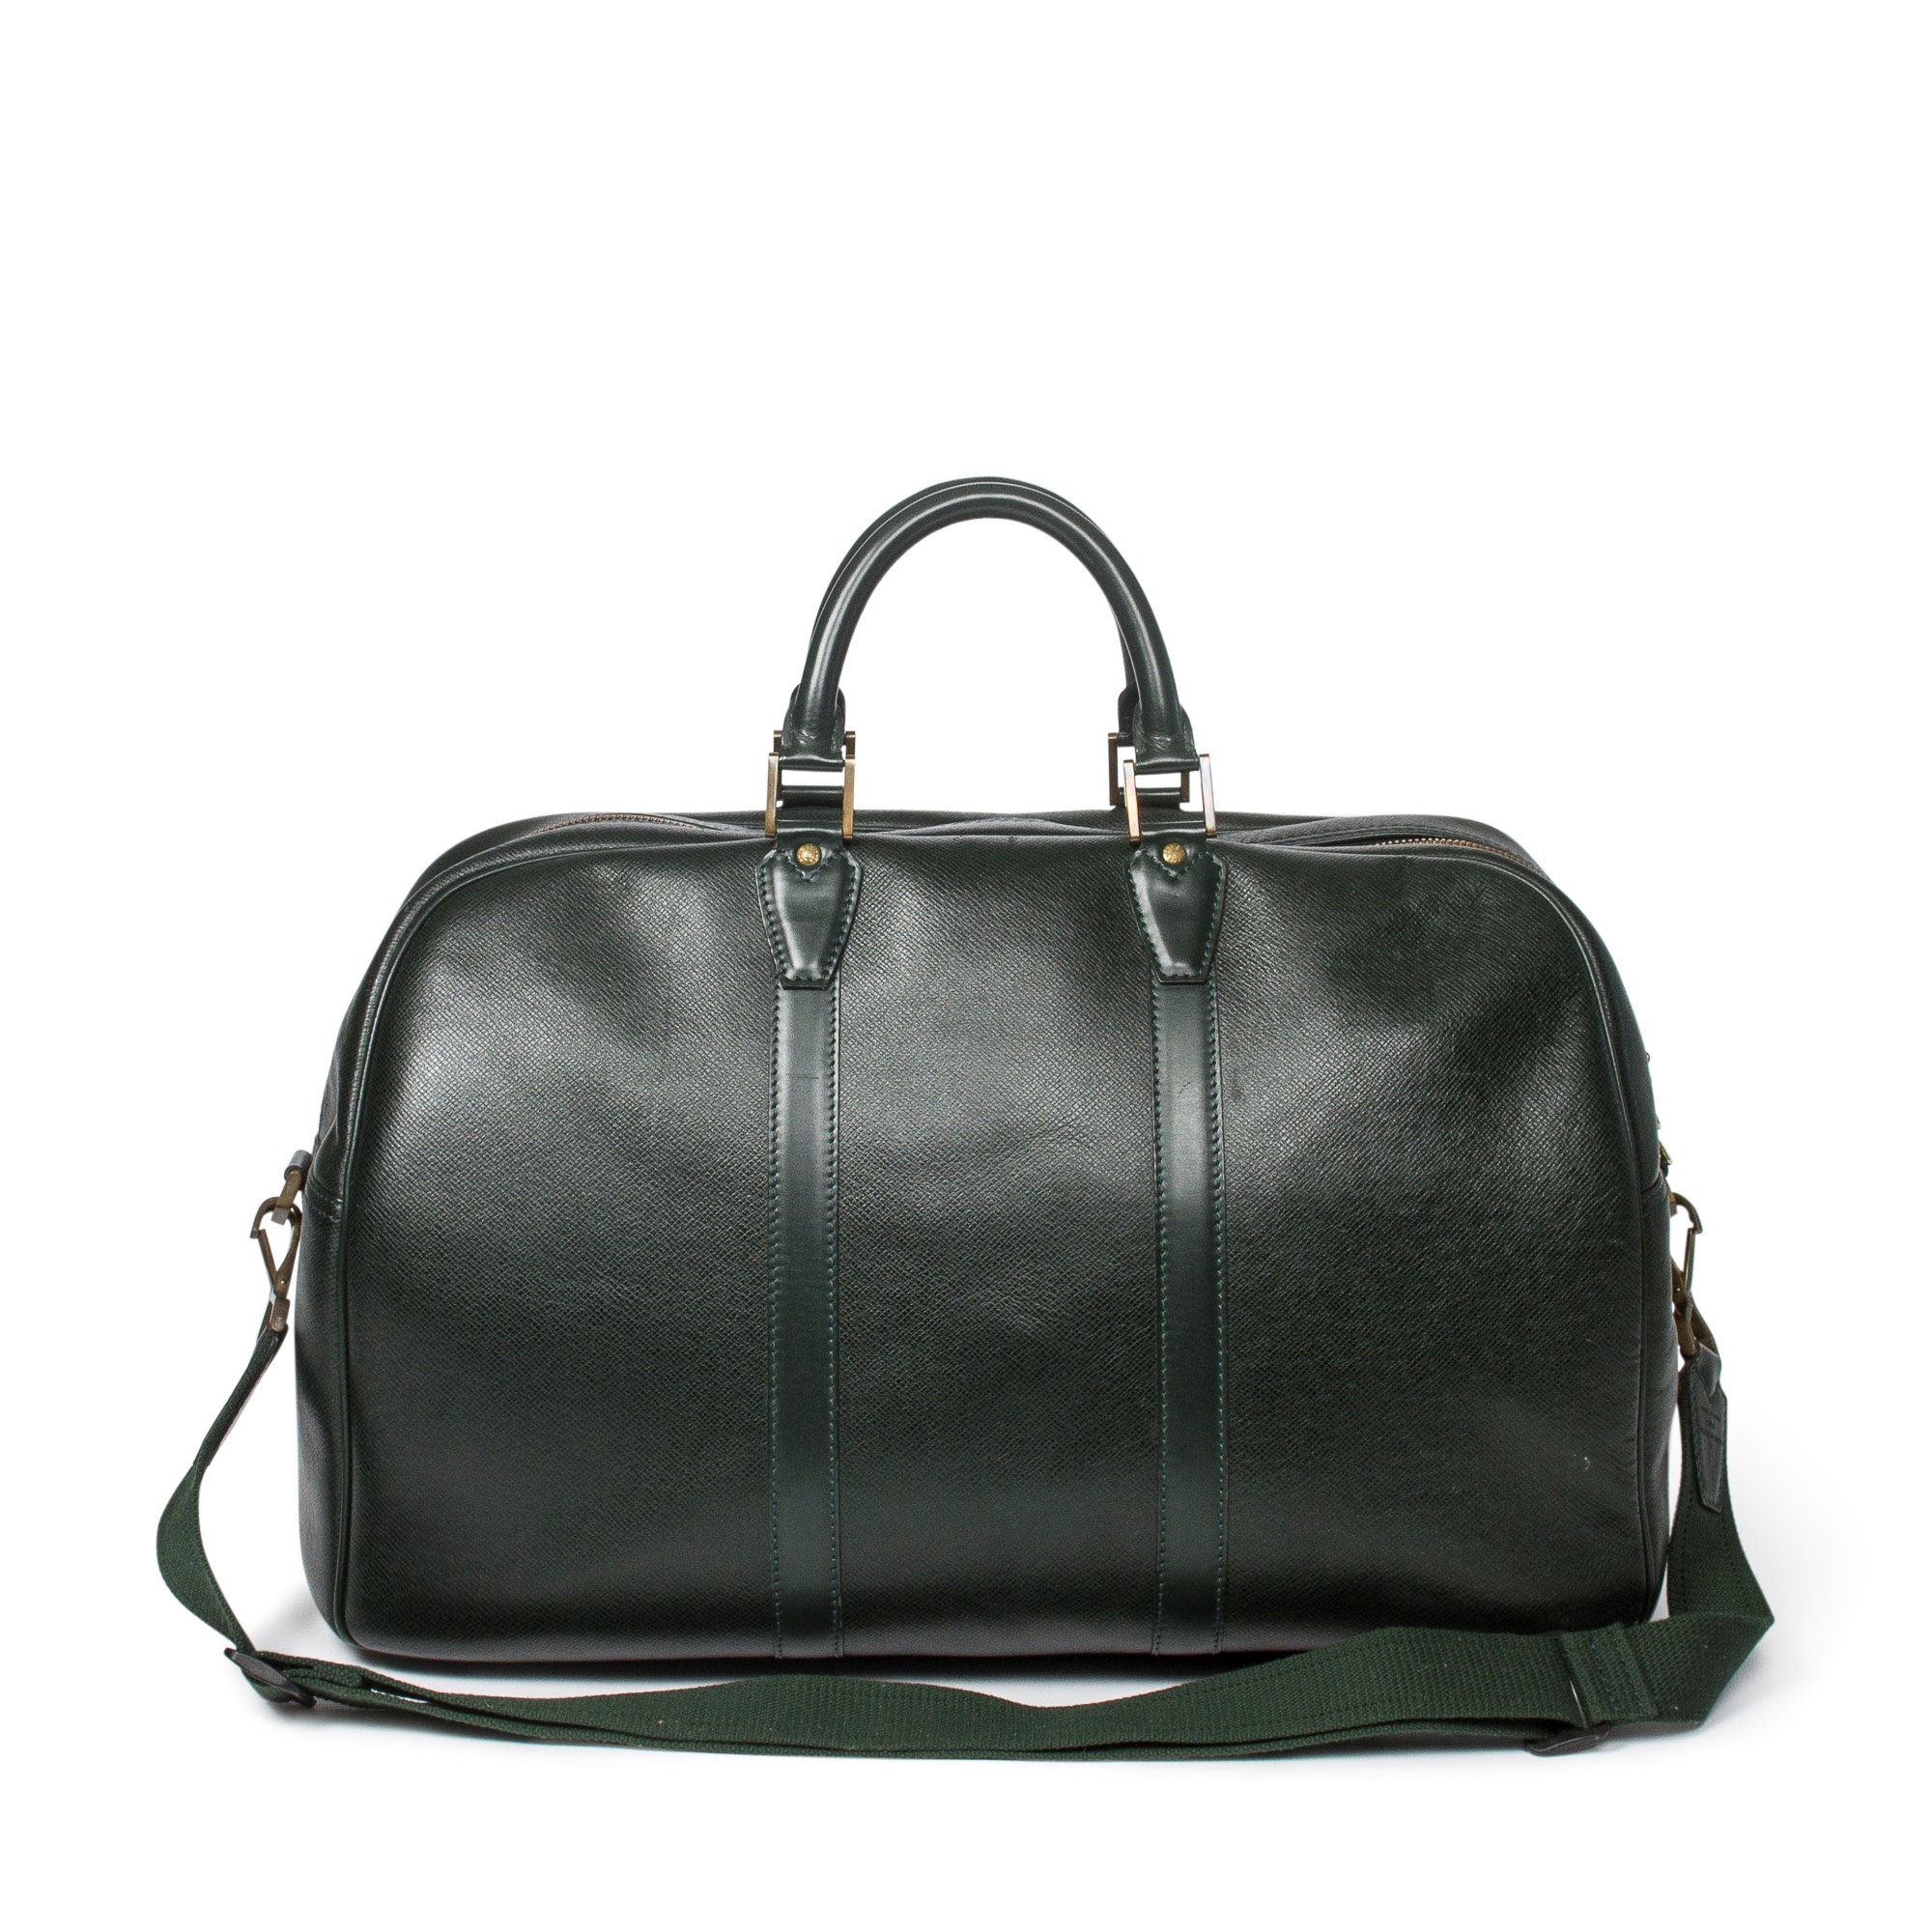 Sold at Auction: Louis Vuitton Taiga Leather Briefcase